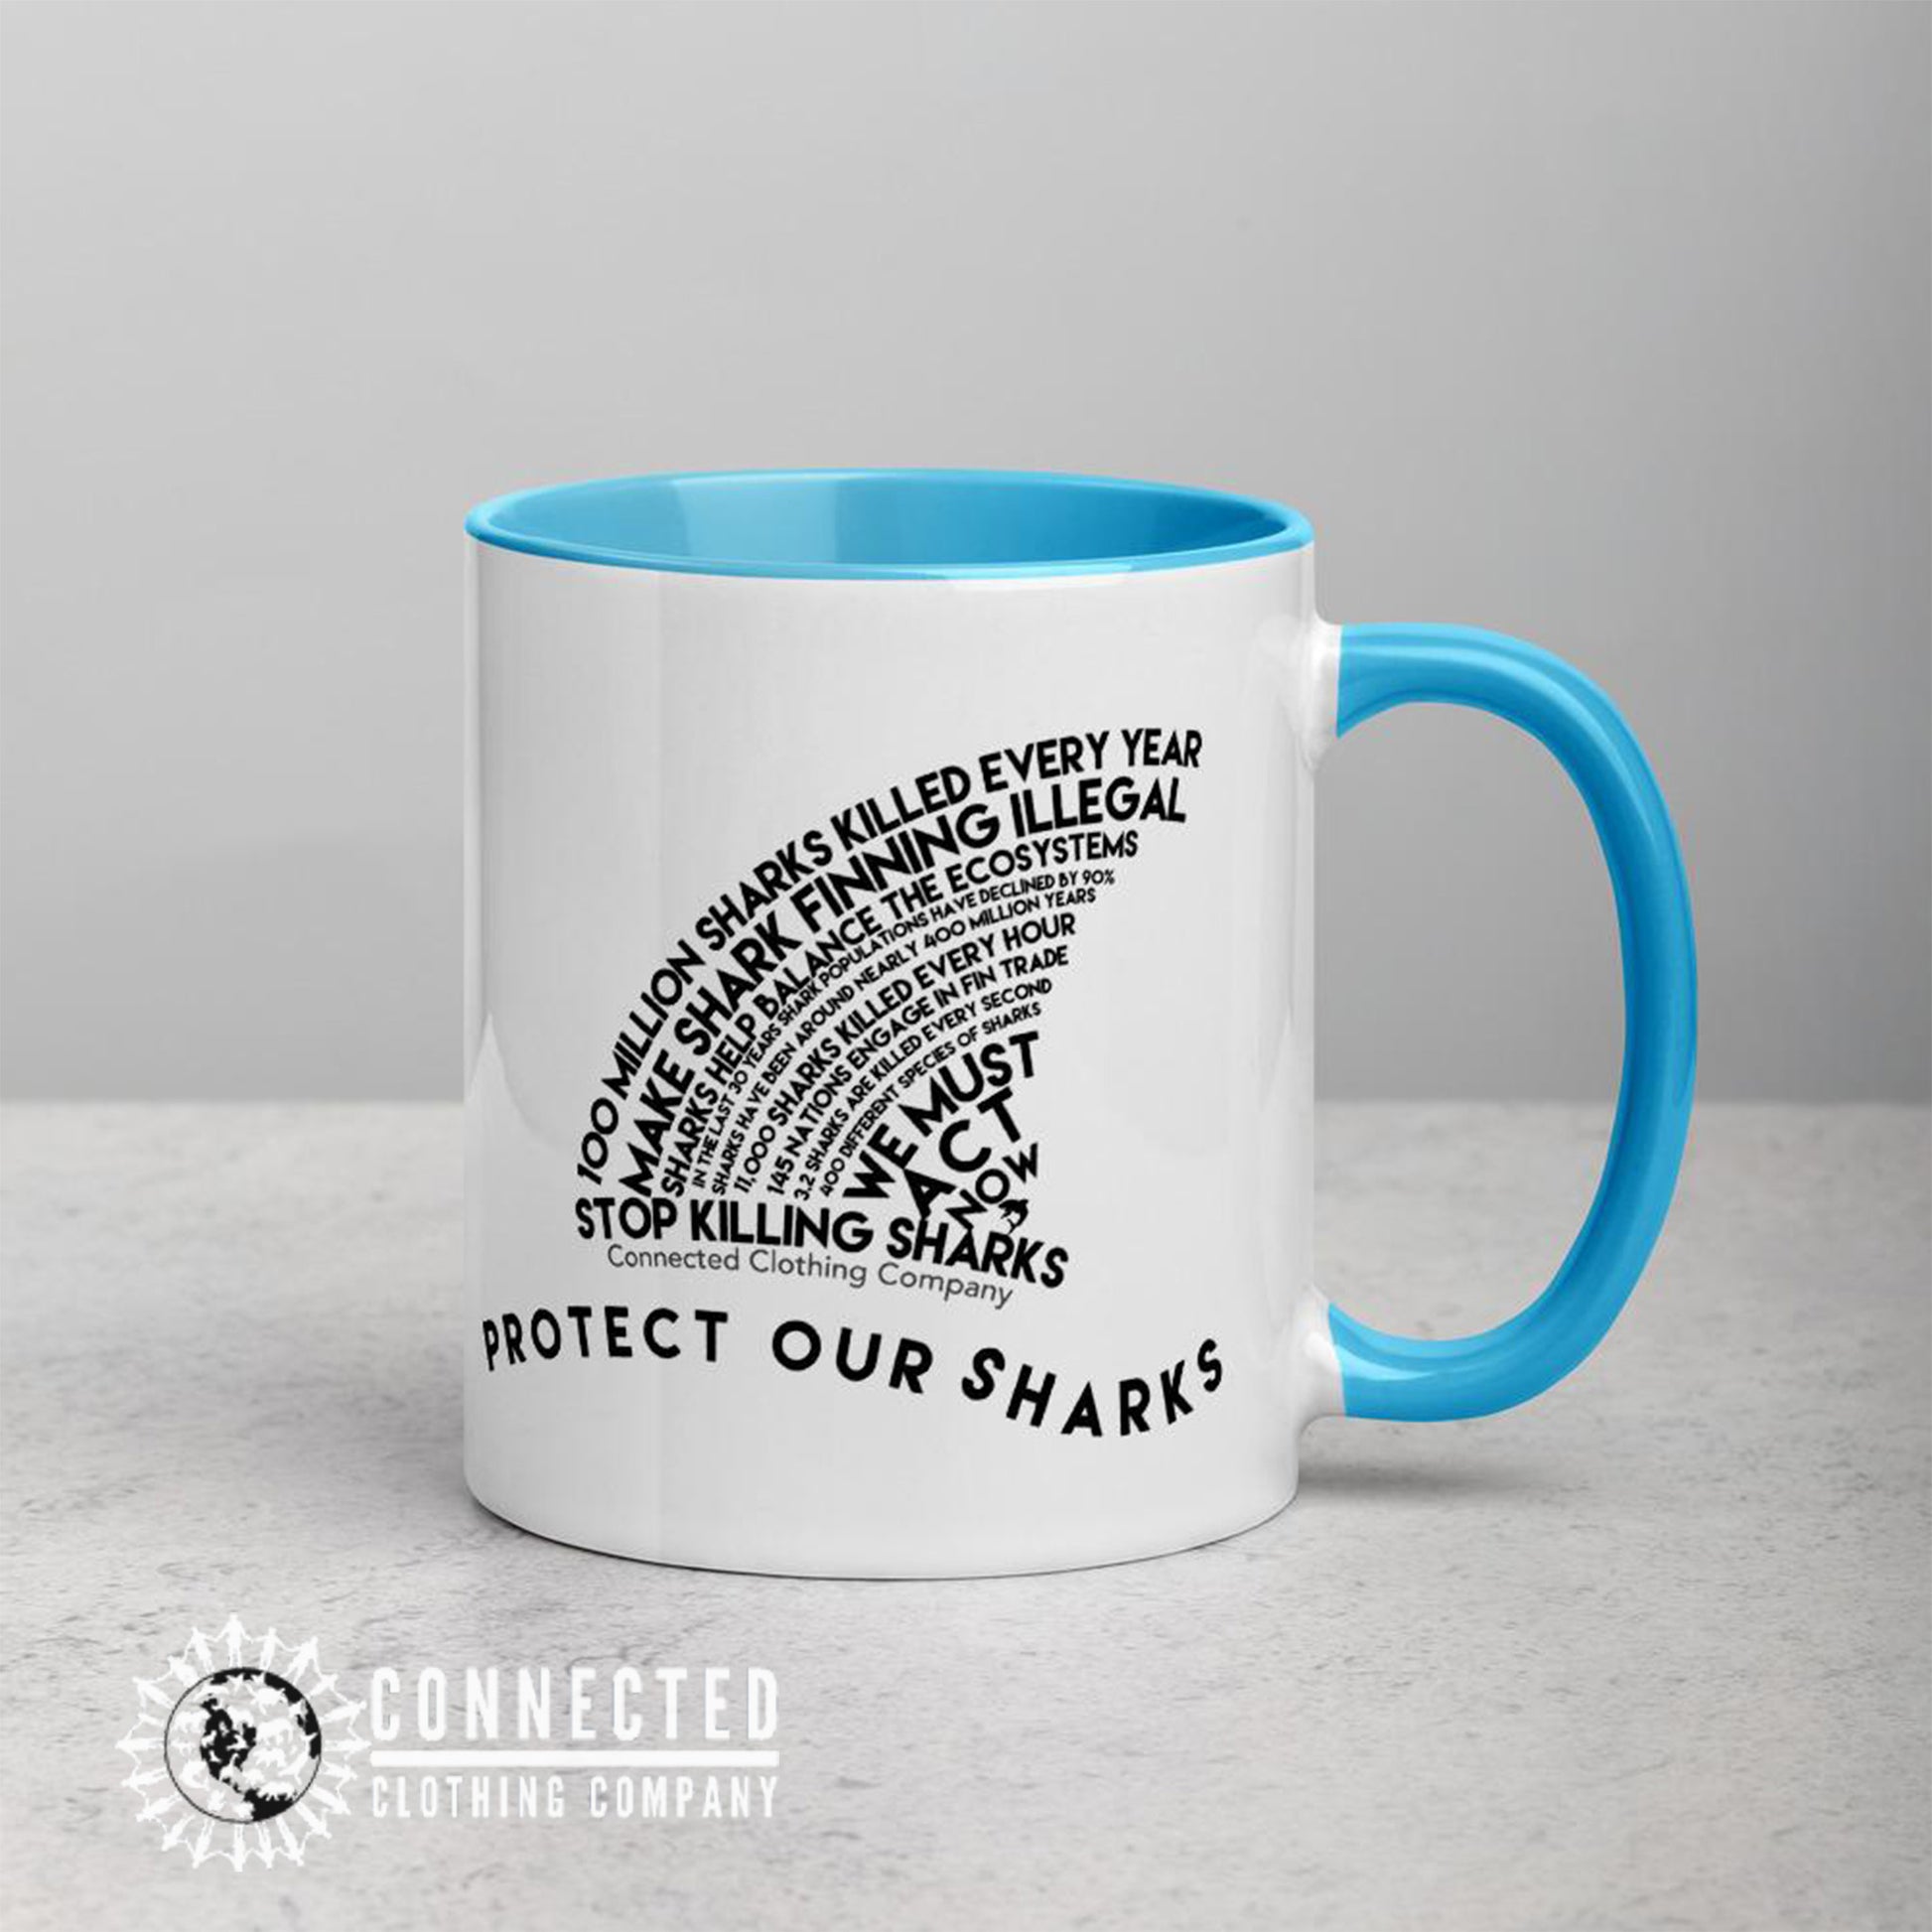 Left Side of Protect Our Sharks Mug With Blue Coloring on Inside, Rim, and Handle - Connected Clothing Company - Ethically and Sustainably Made - 10% donated to Oceana shark conservation